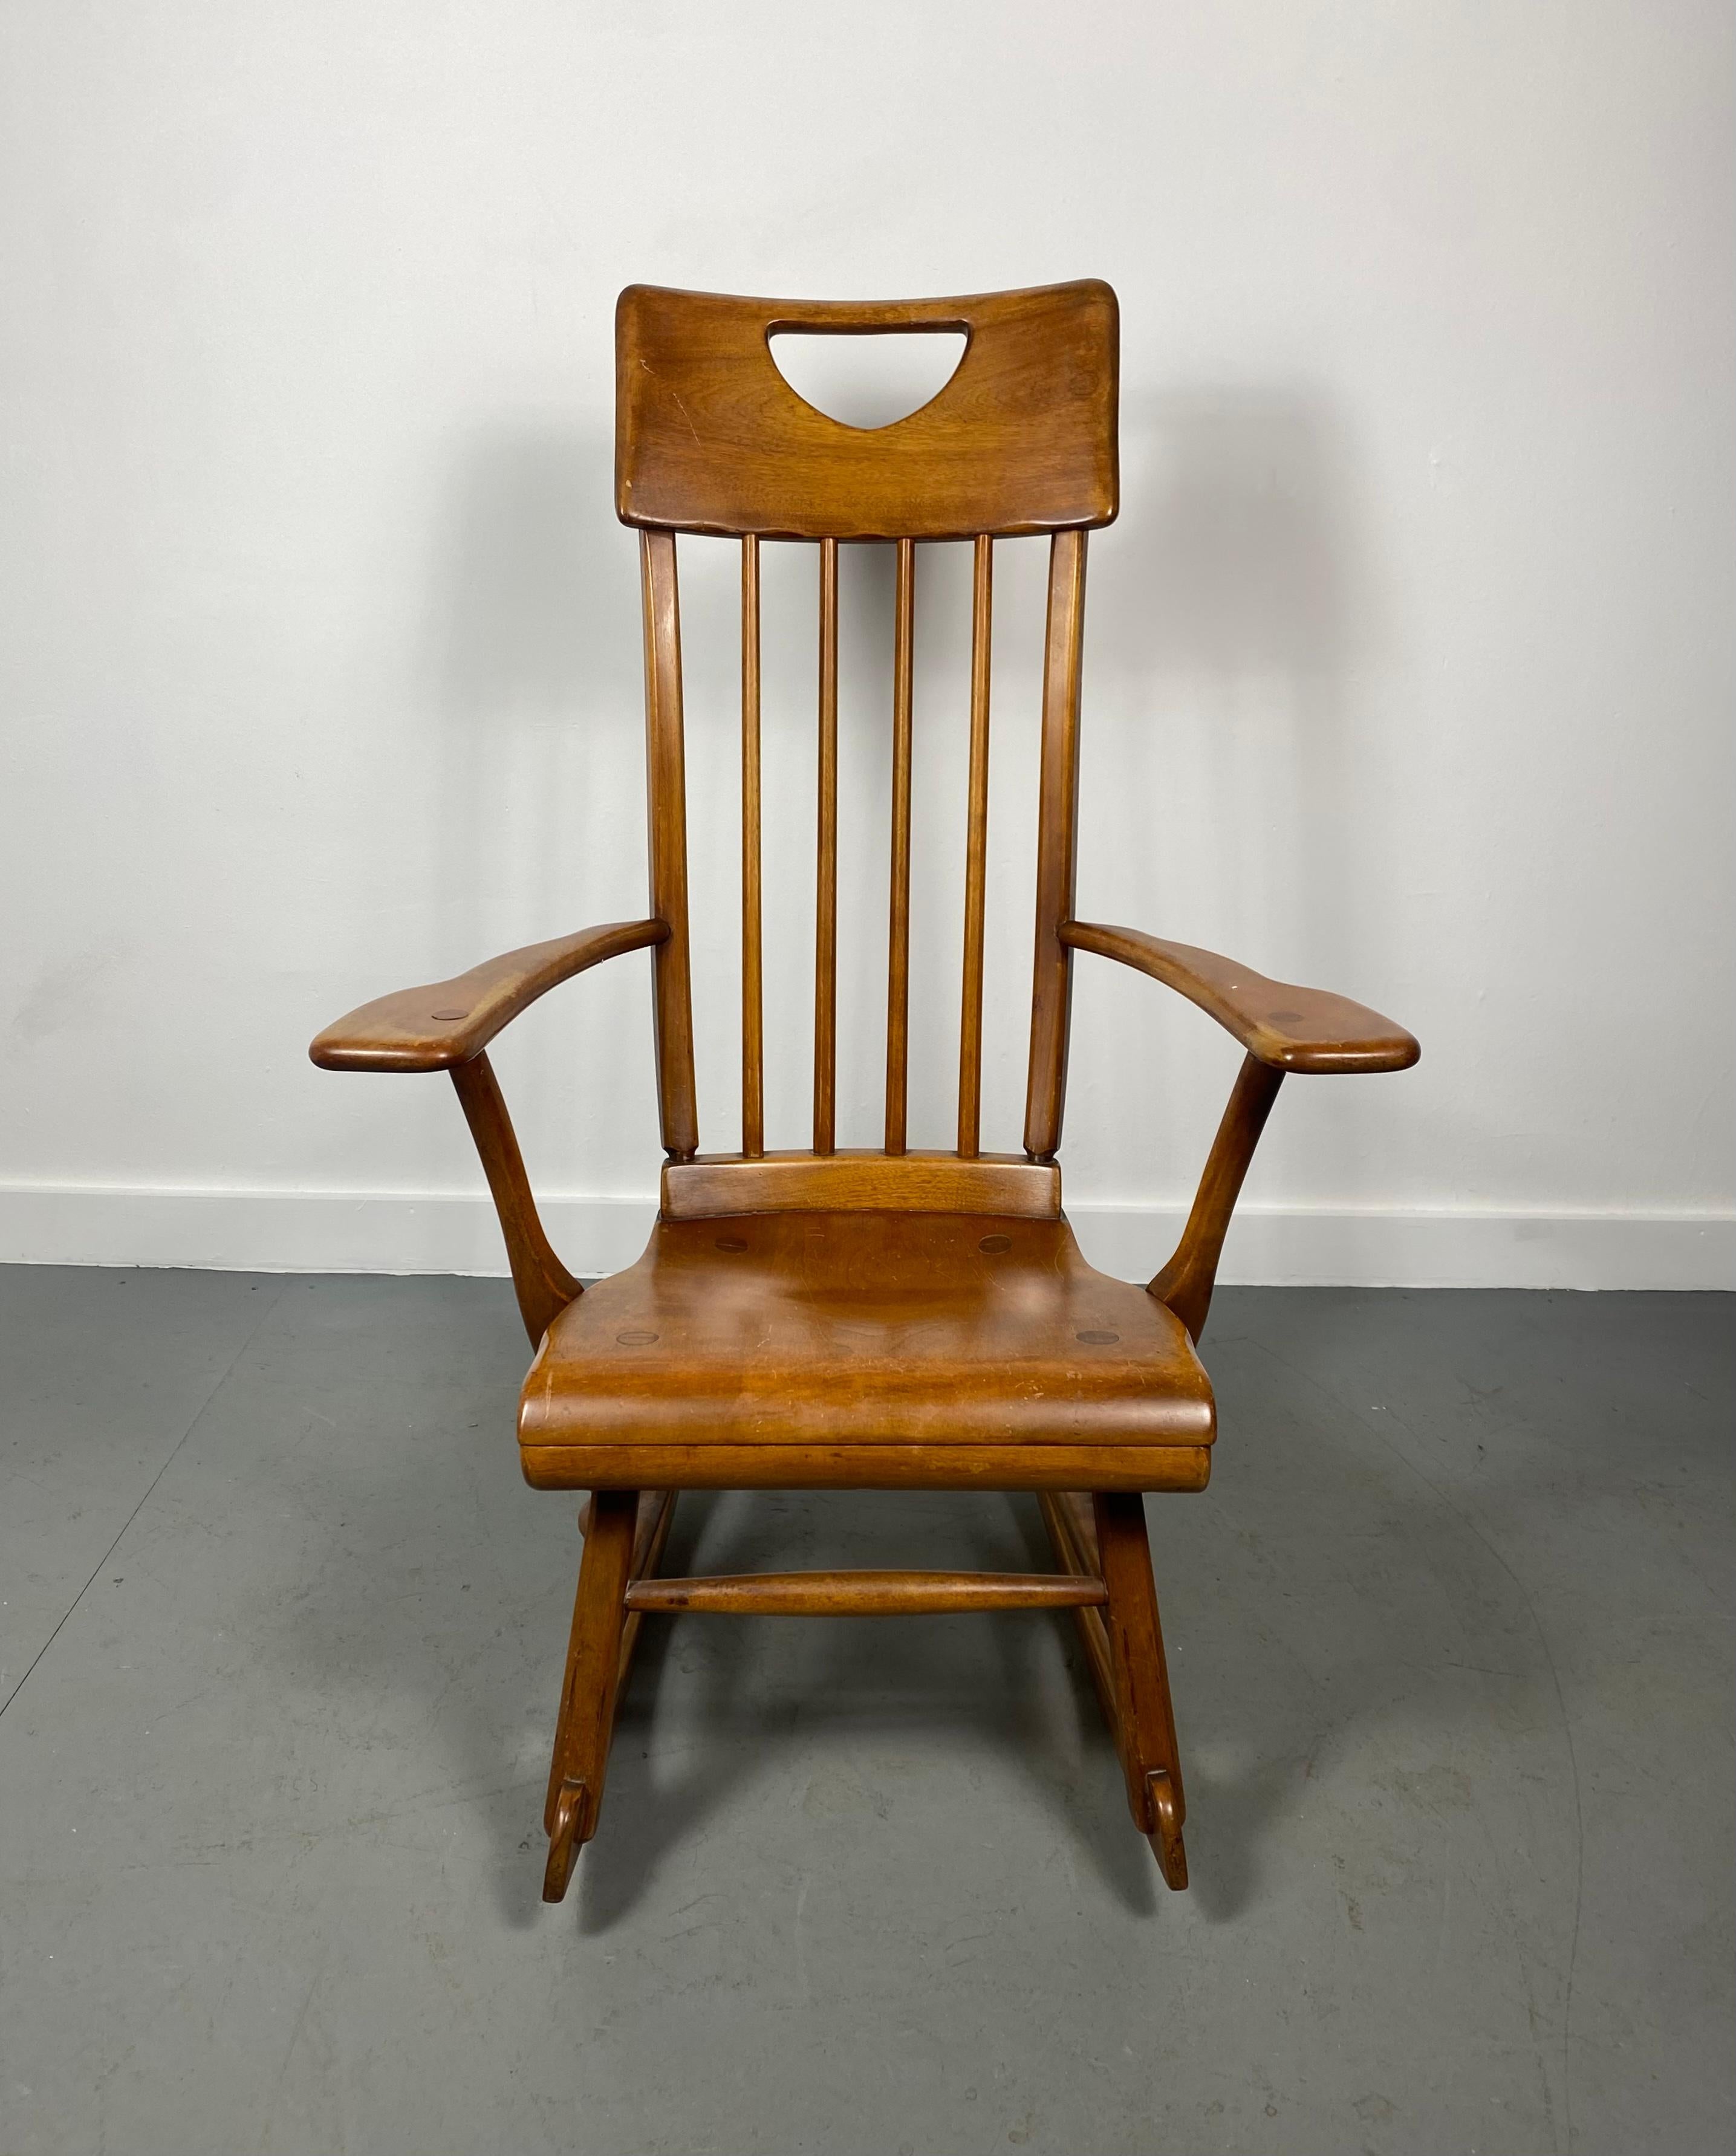 Colonial American style solid maple wood high-back rocking chair designed by Herman de Vries for Sikes Furniture Co. This rocking chair is from the 1930s and is all handmade. Wonderful original condition..patina.. Marked with a labels.. Hand